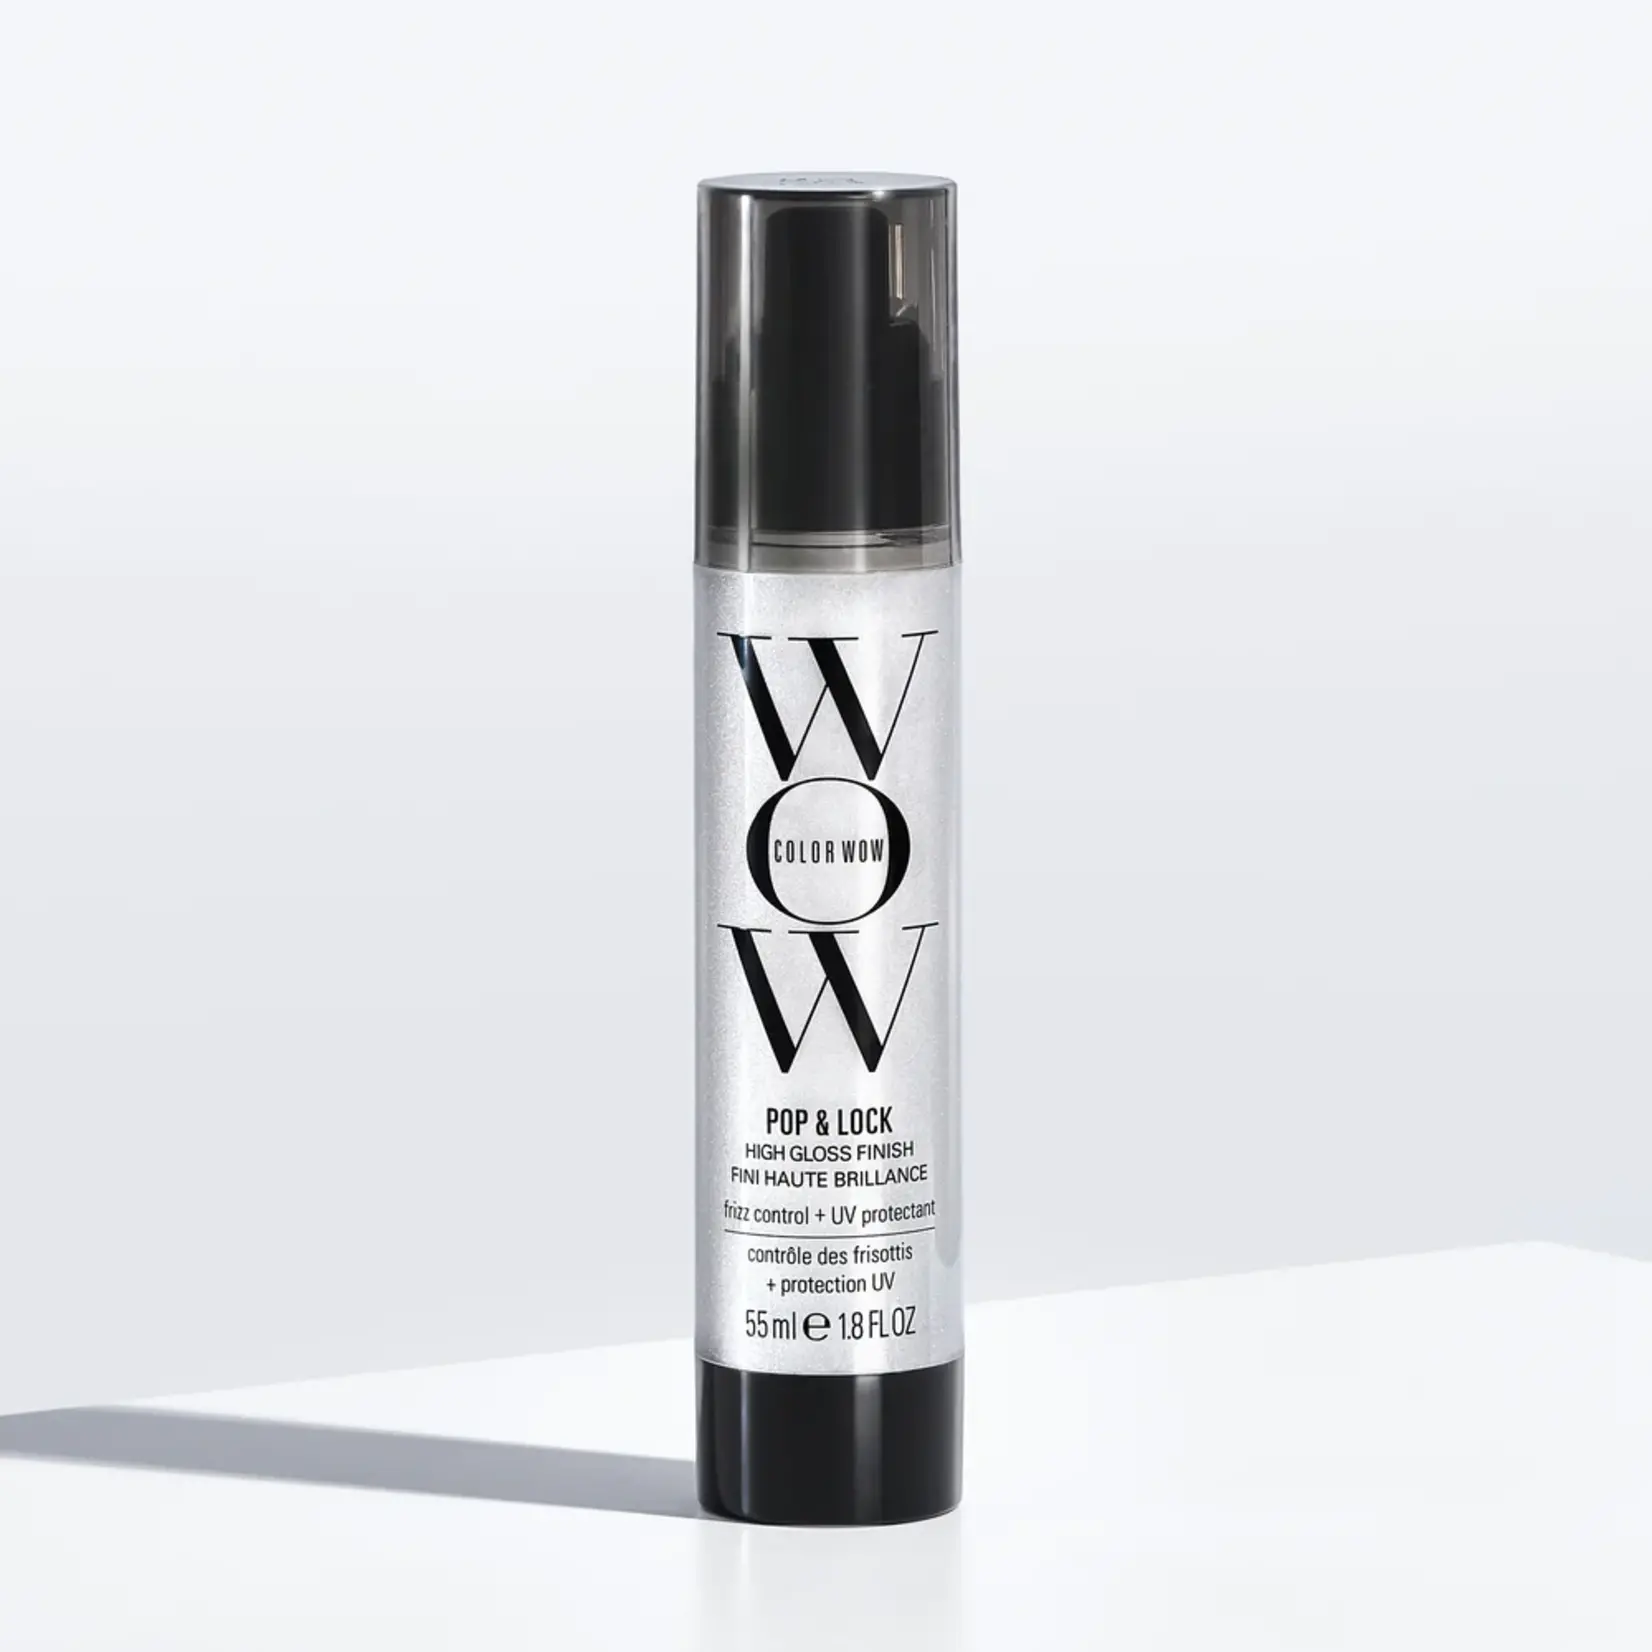 COLORWOW COLOR WOW Pop + Lock Frizz Control + Glossing Serum 55ml